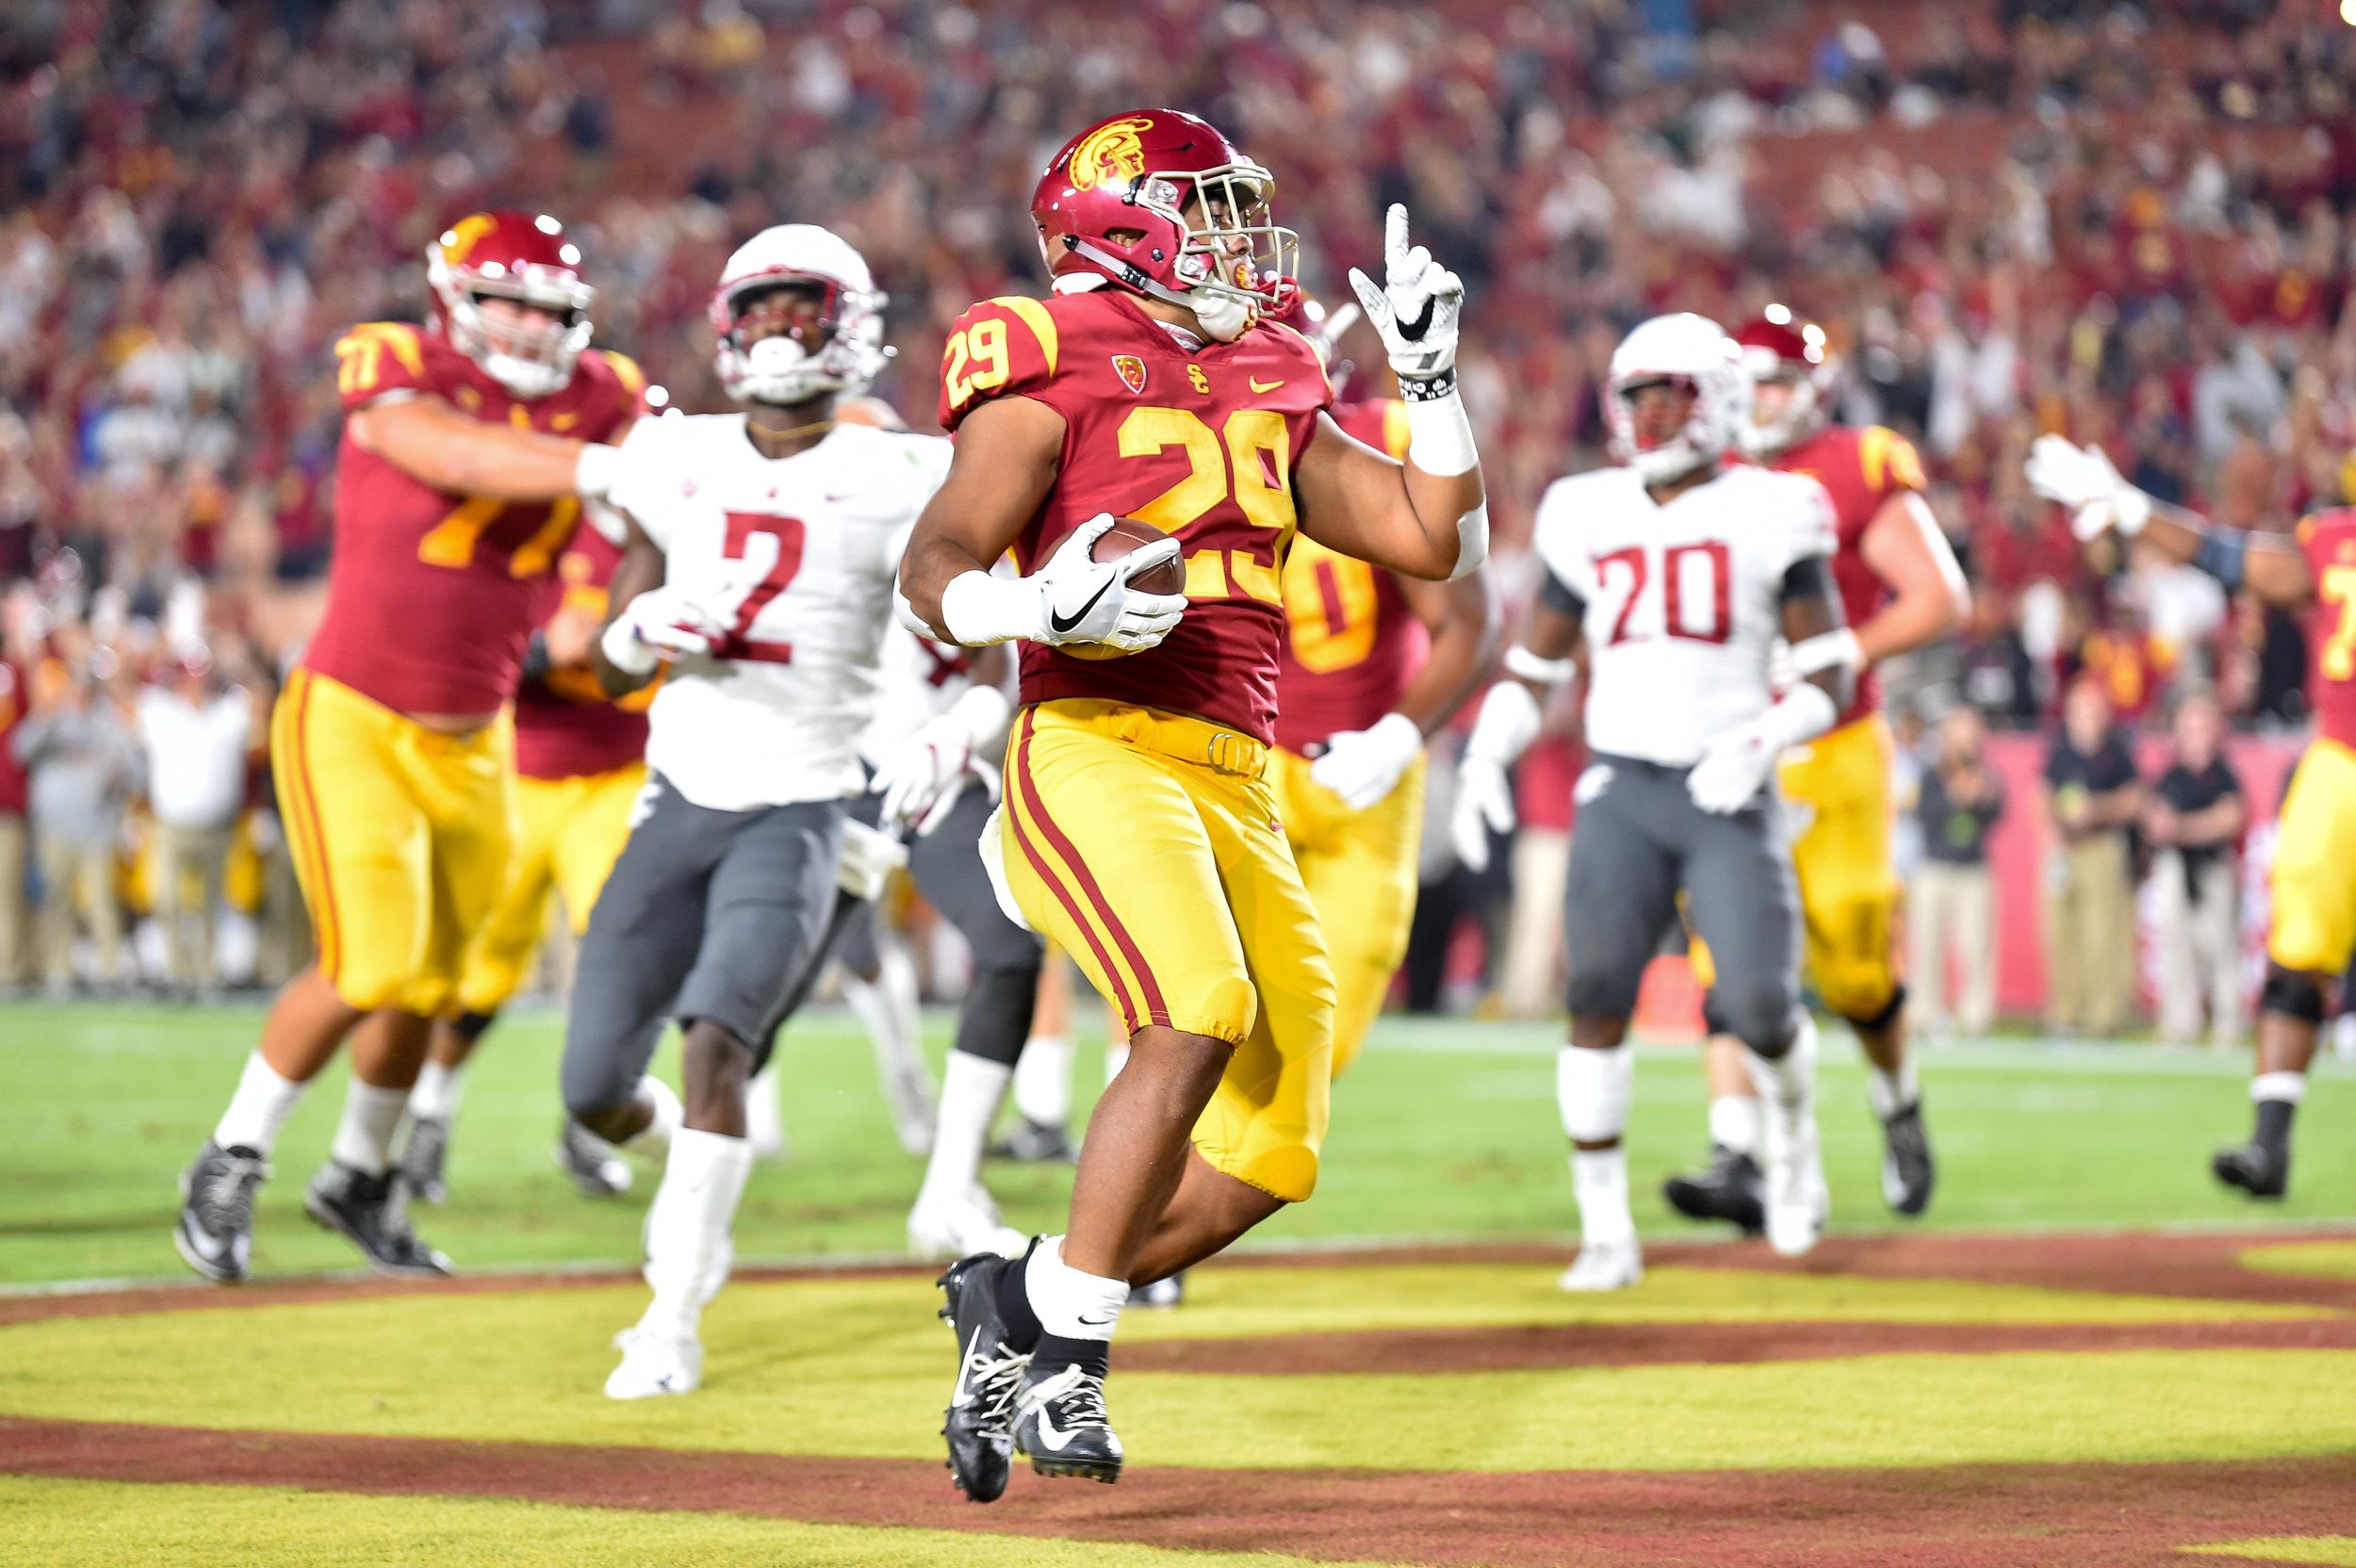 USC racks up the rushing yards early, but loses steam late in first